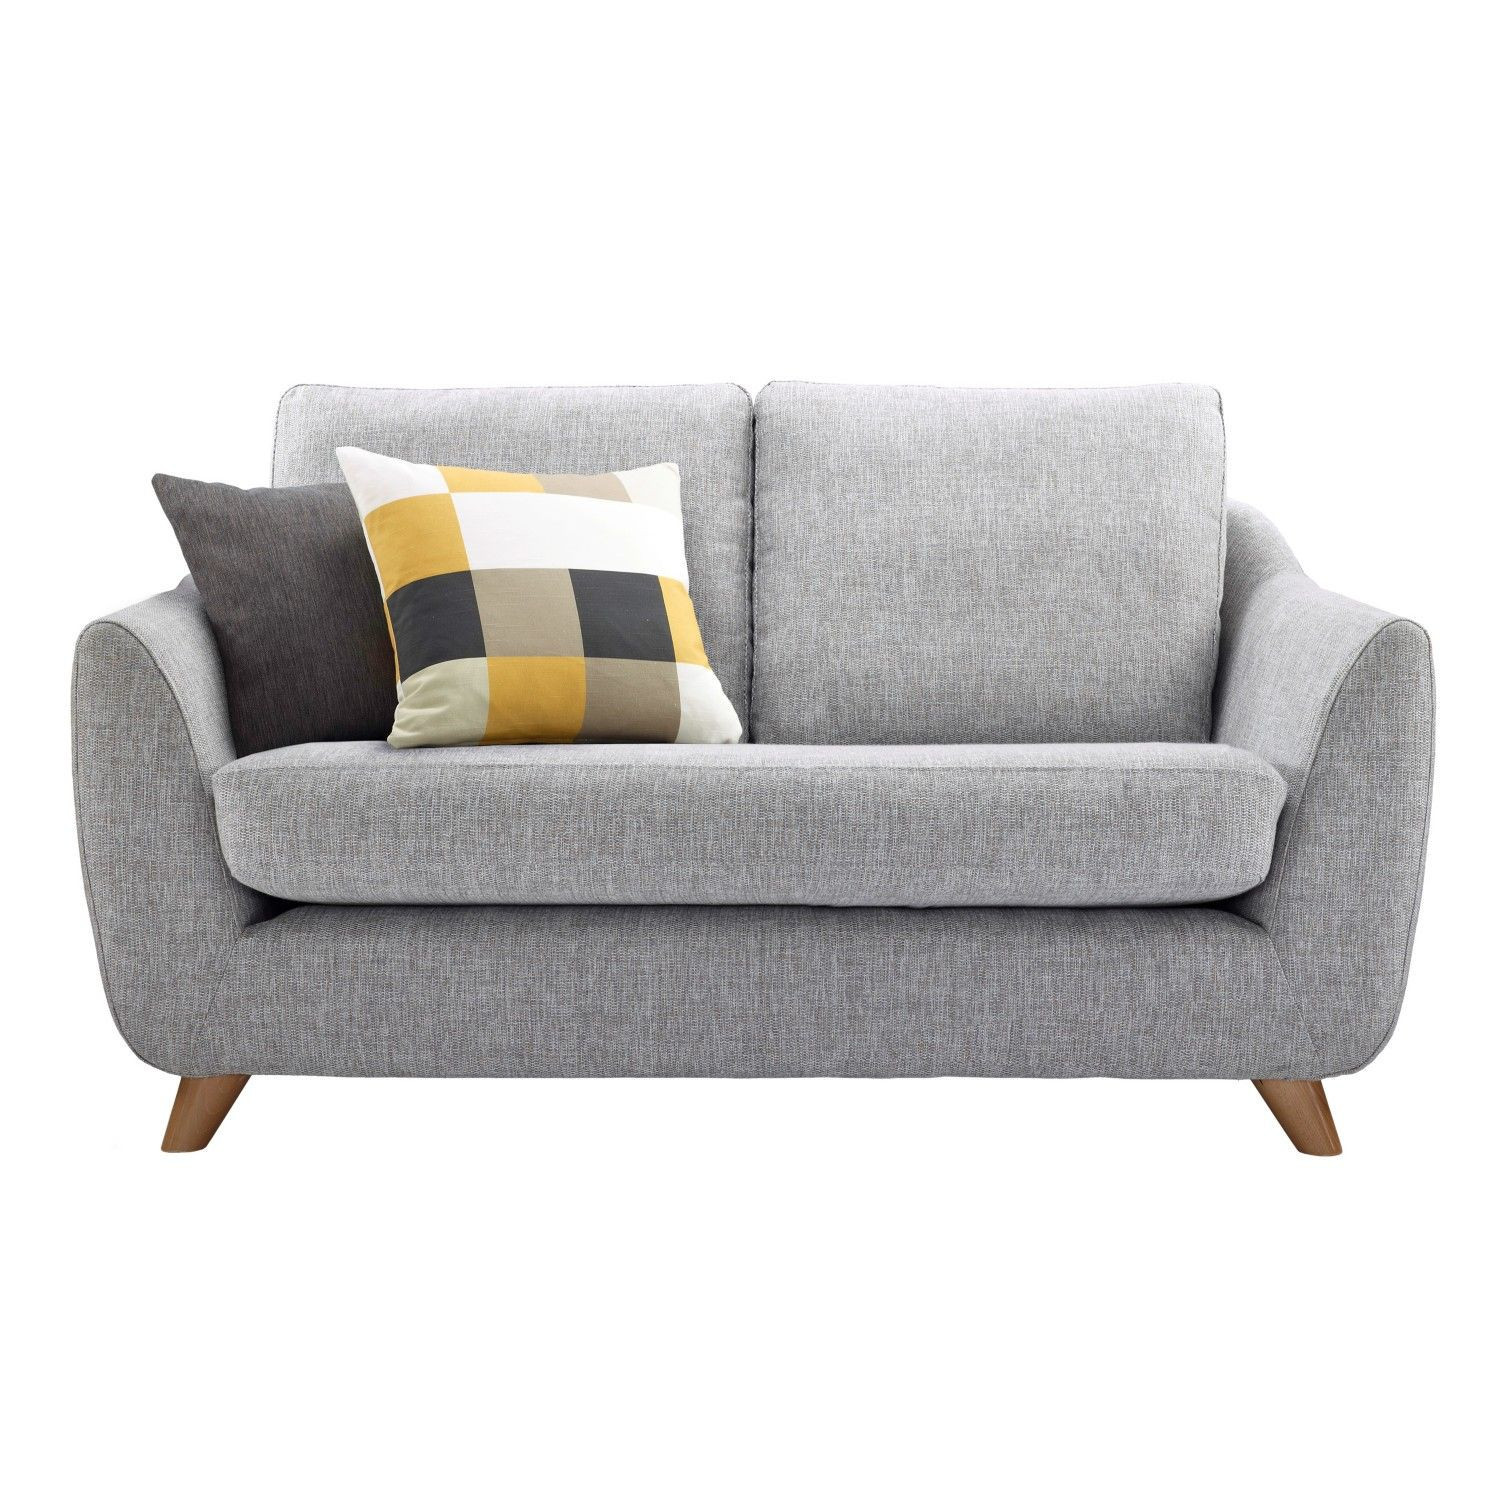 Small Sofa For Bedroom
 loveseats for small spaces